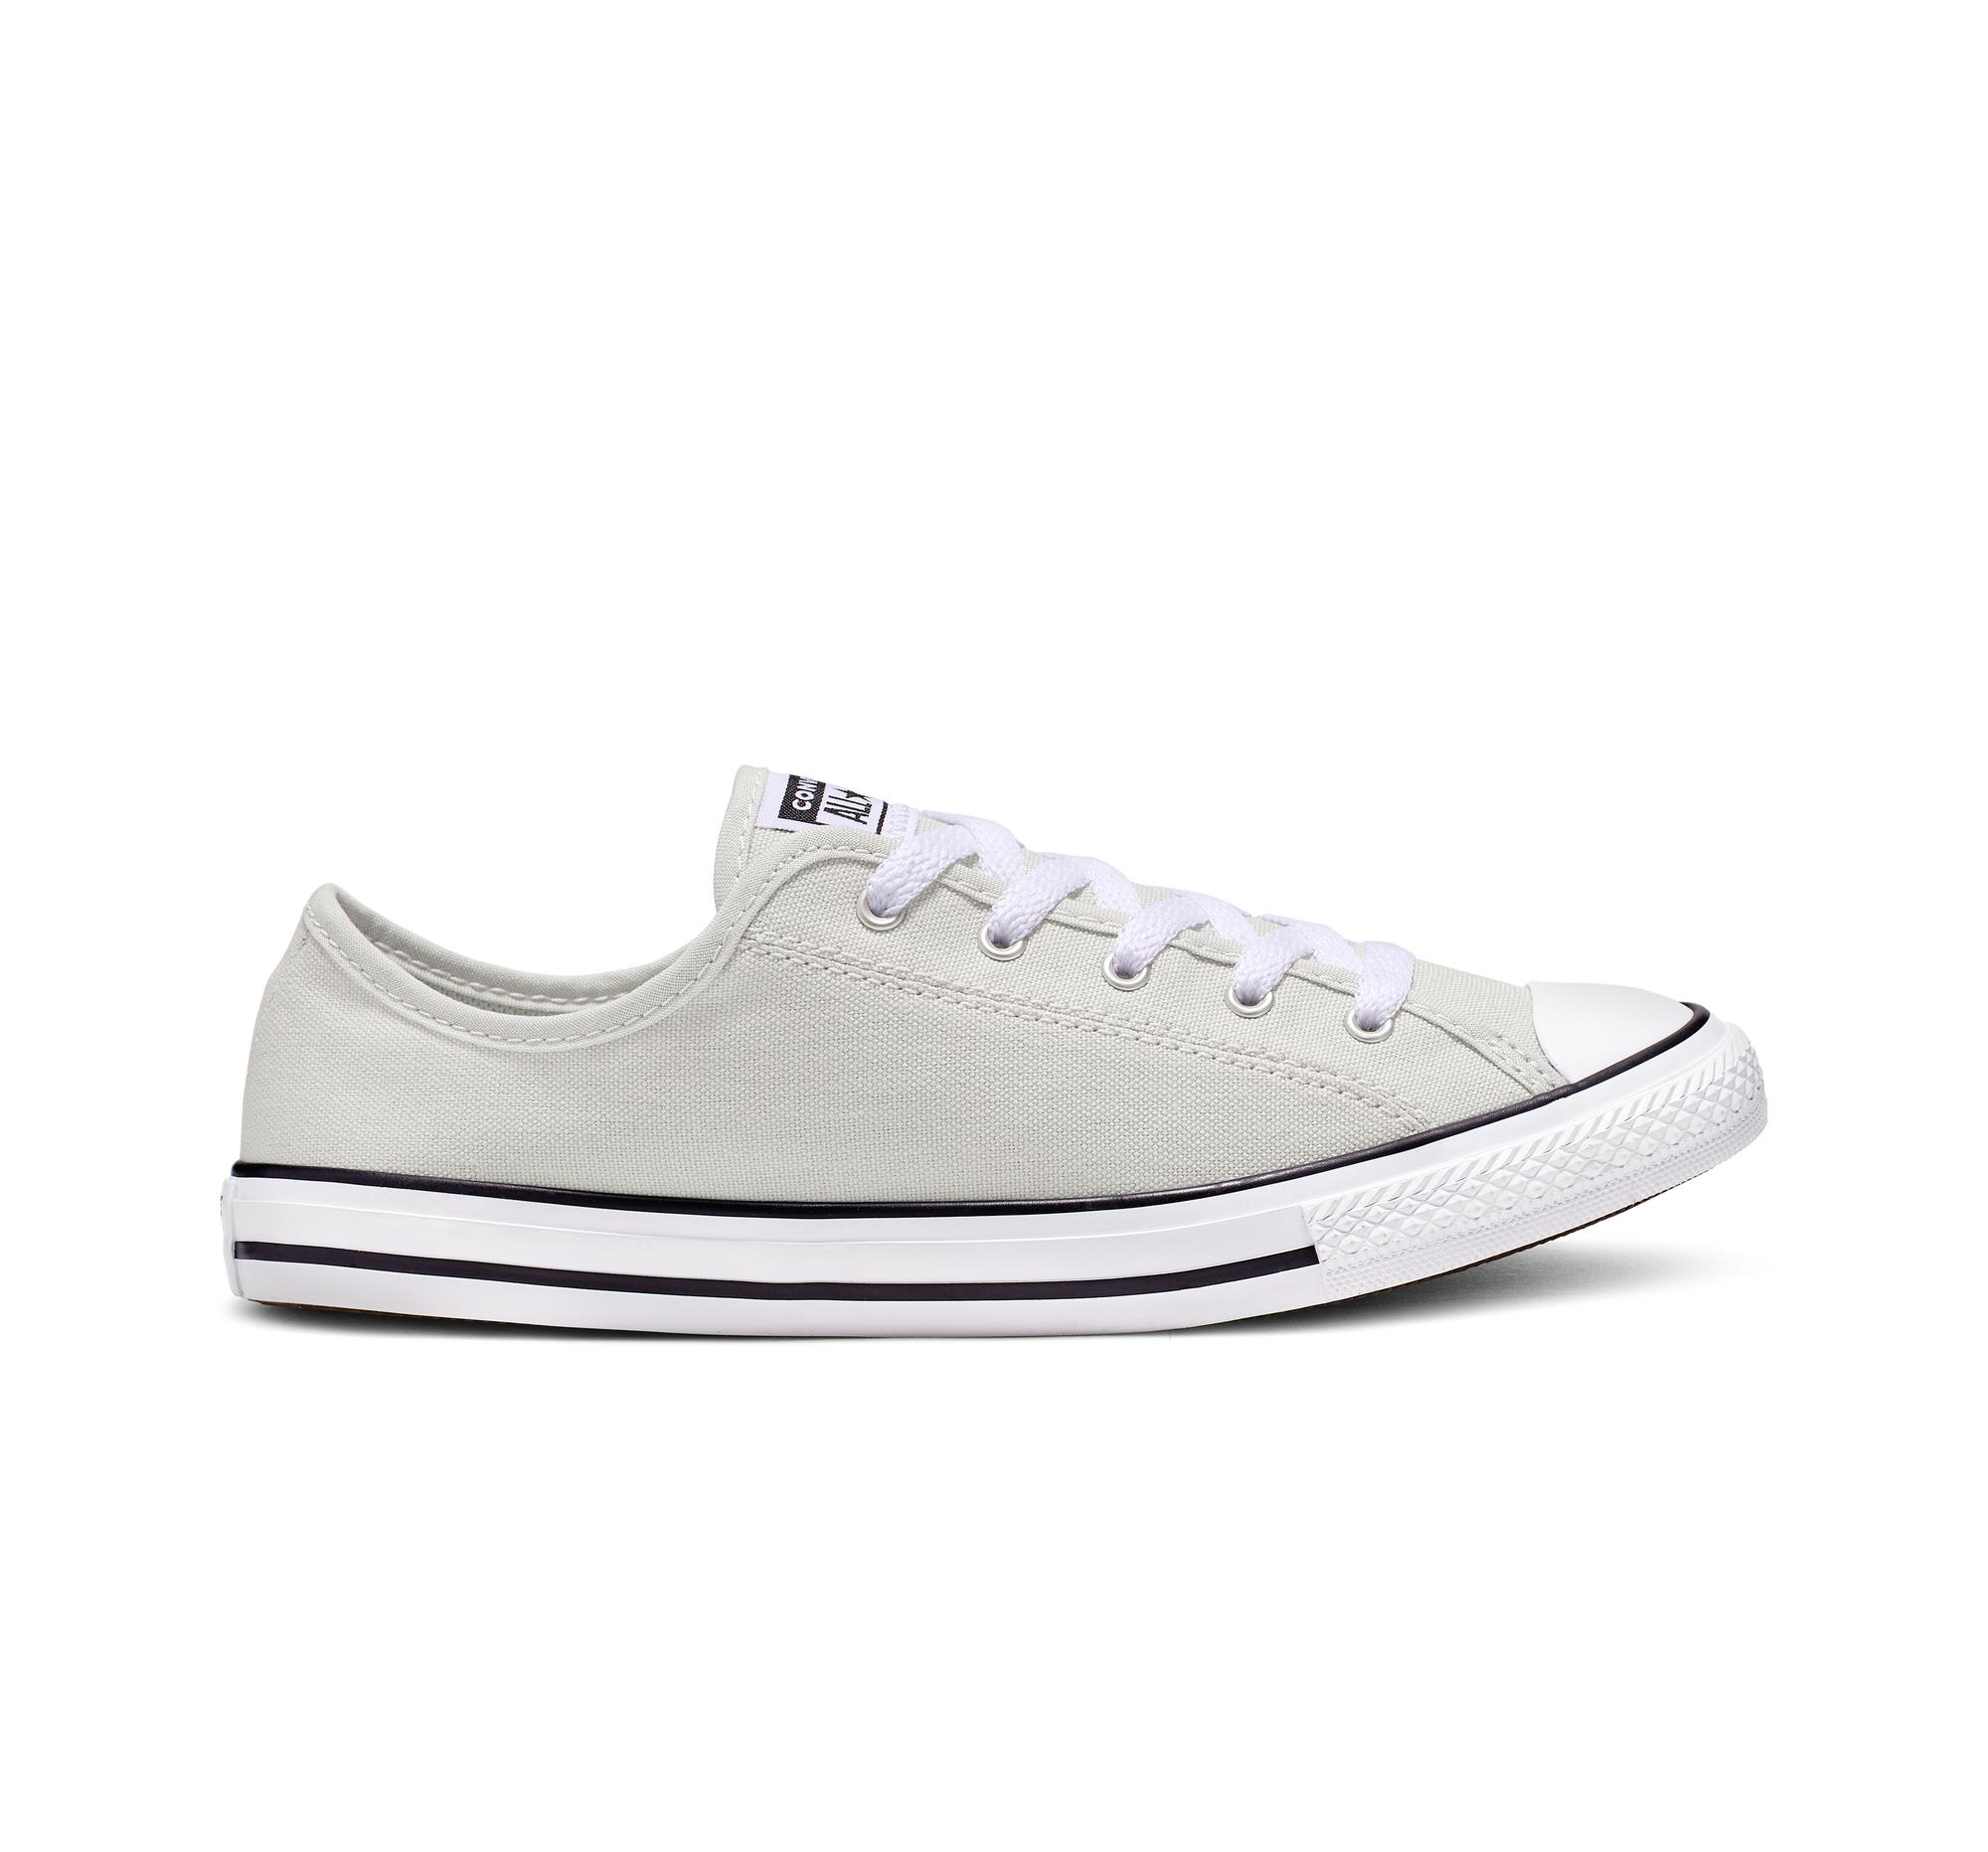 Converse Chuck Taylor All Star Dainty Low Top in Grey (Gray) - Lyst